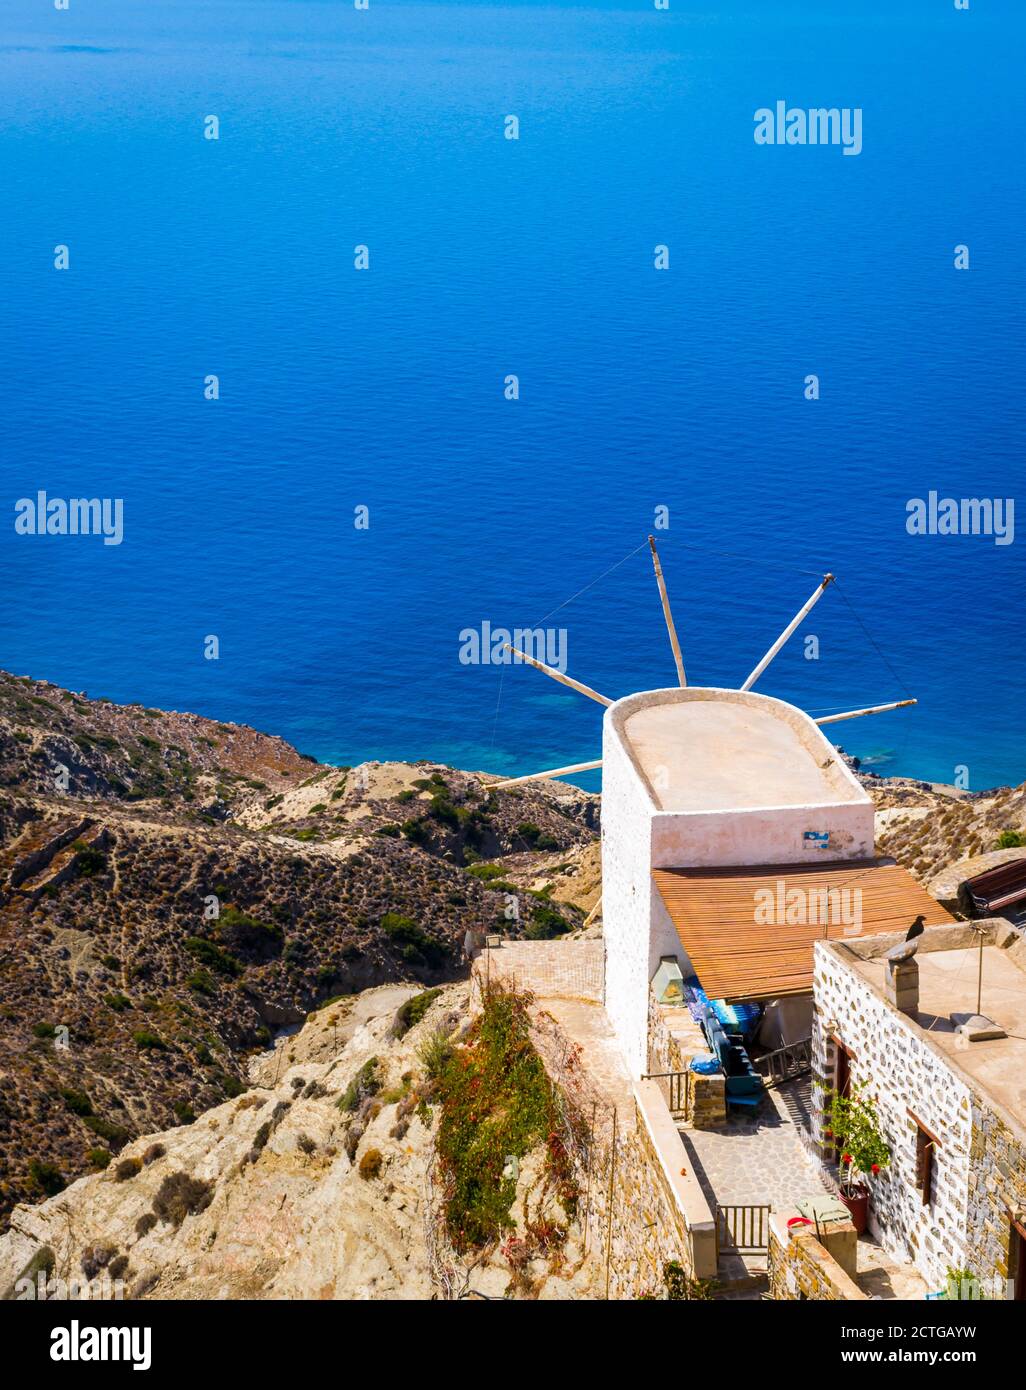 Old White Windmill overlooking Aegean sea in Traditional village of Olympos, Karpathos, Dodecanese Island, Greece Stock Photo